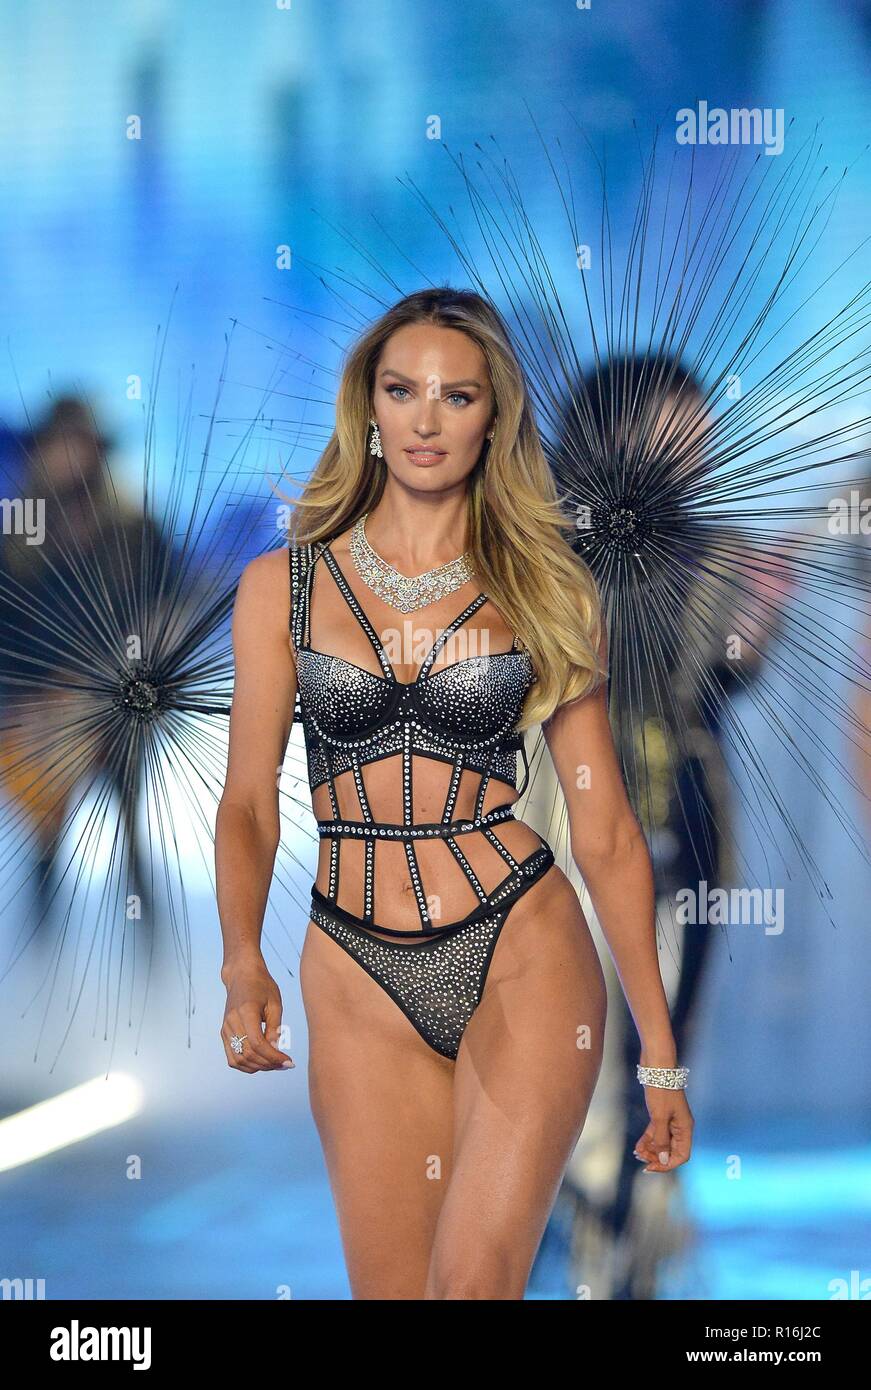 New York, NY, USA. 8th Nov, 2018. Candice Swanepoel on the runway for 2018  Victoria's Secret